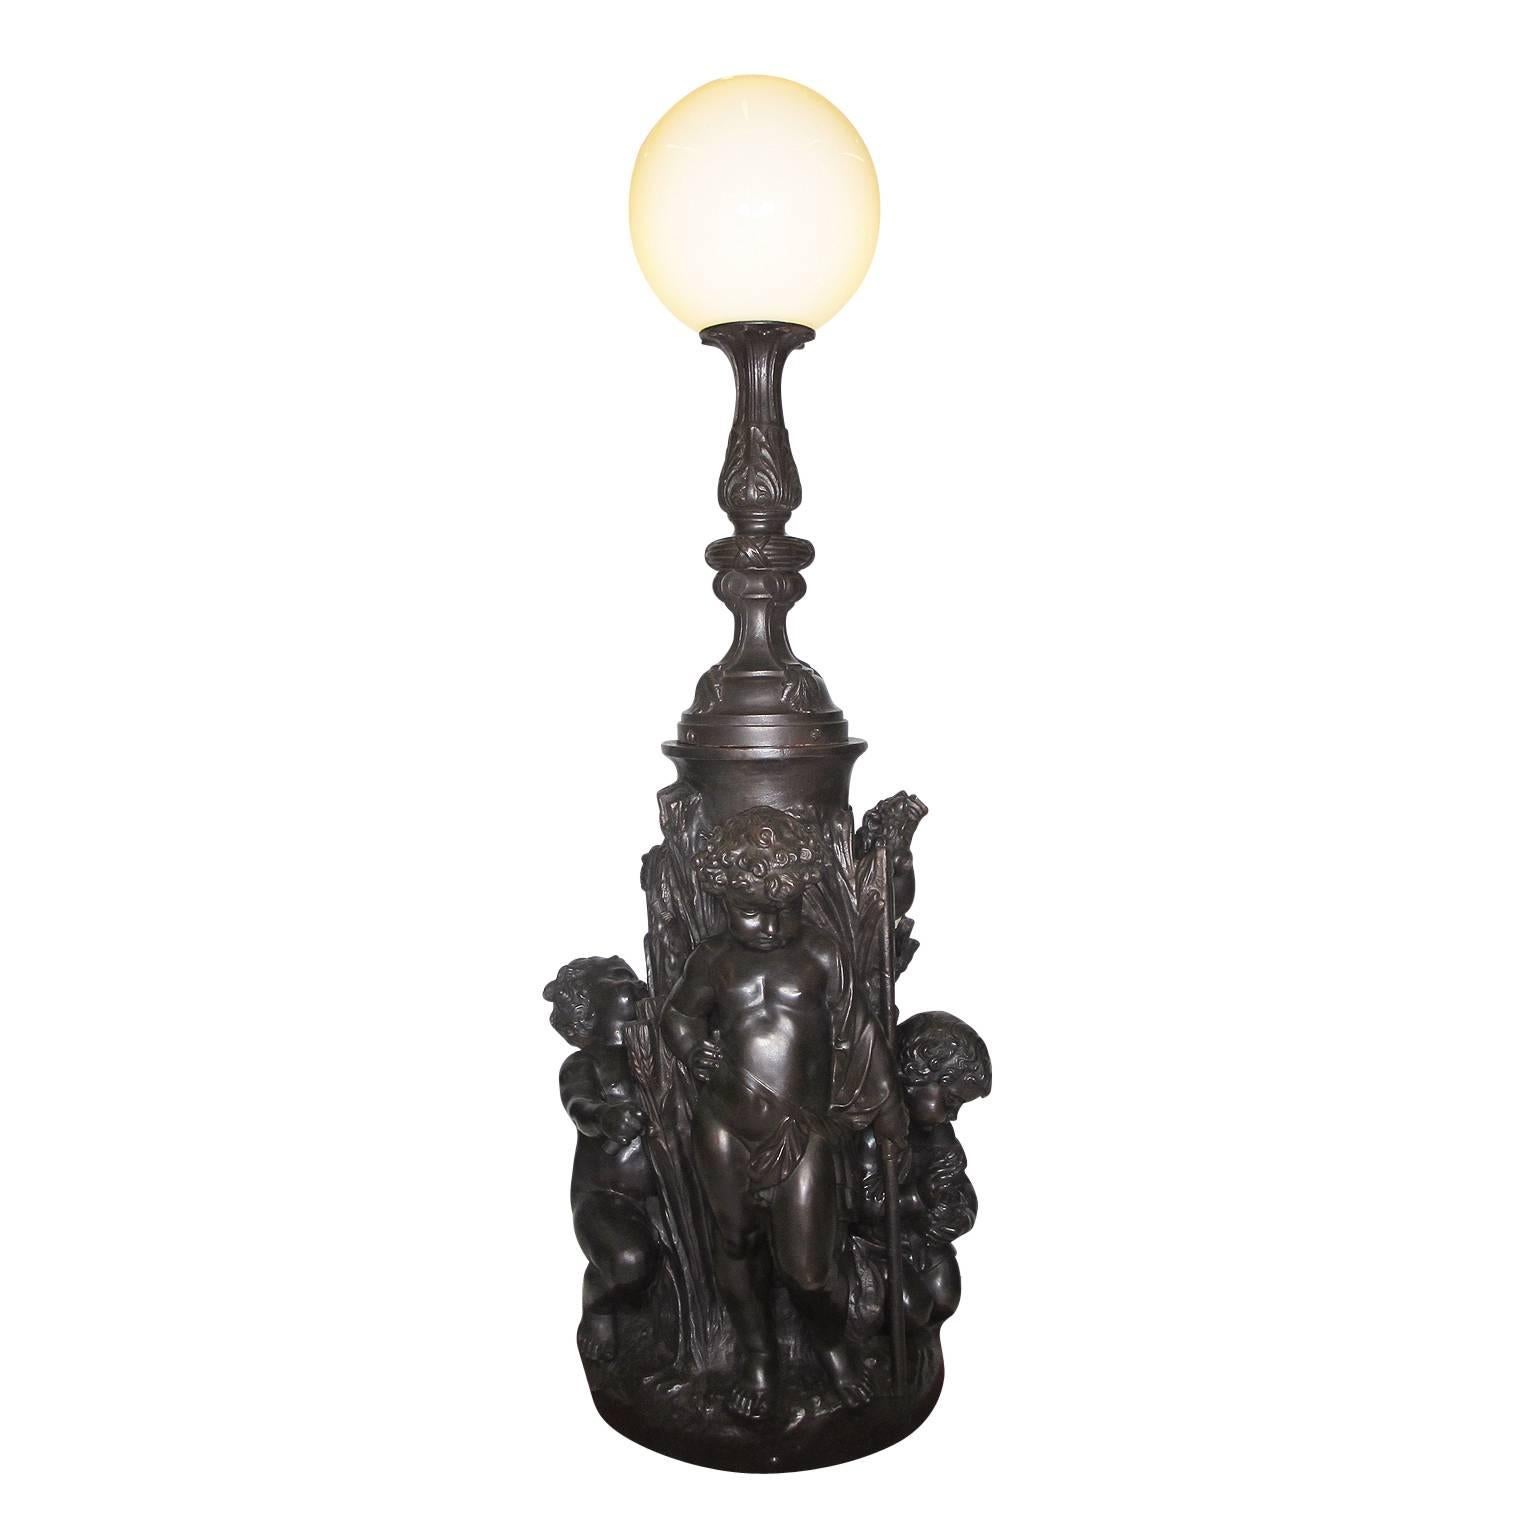 Palatial French 19th-20th Century Allegorical Figural Cast Iron Group Torchere For Sale